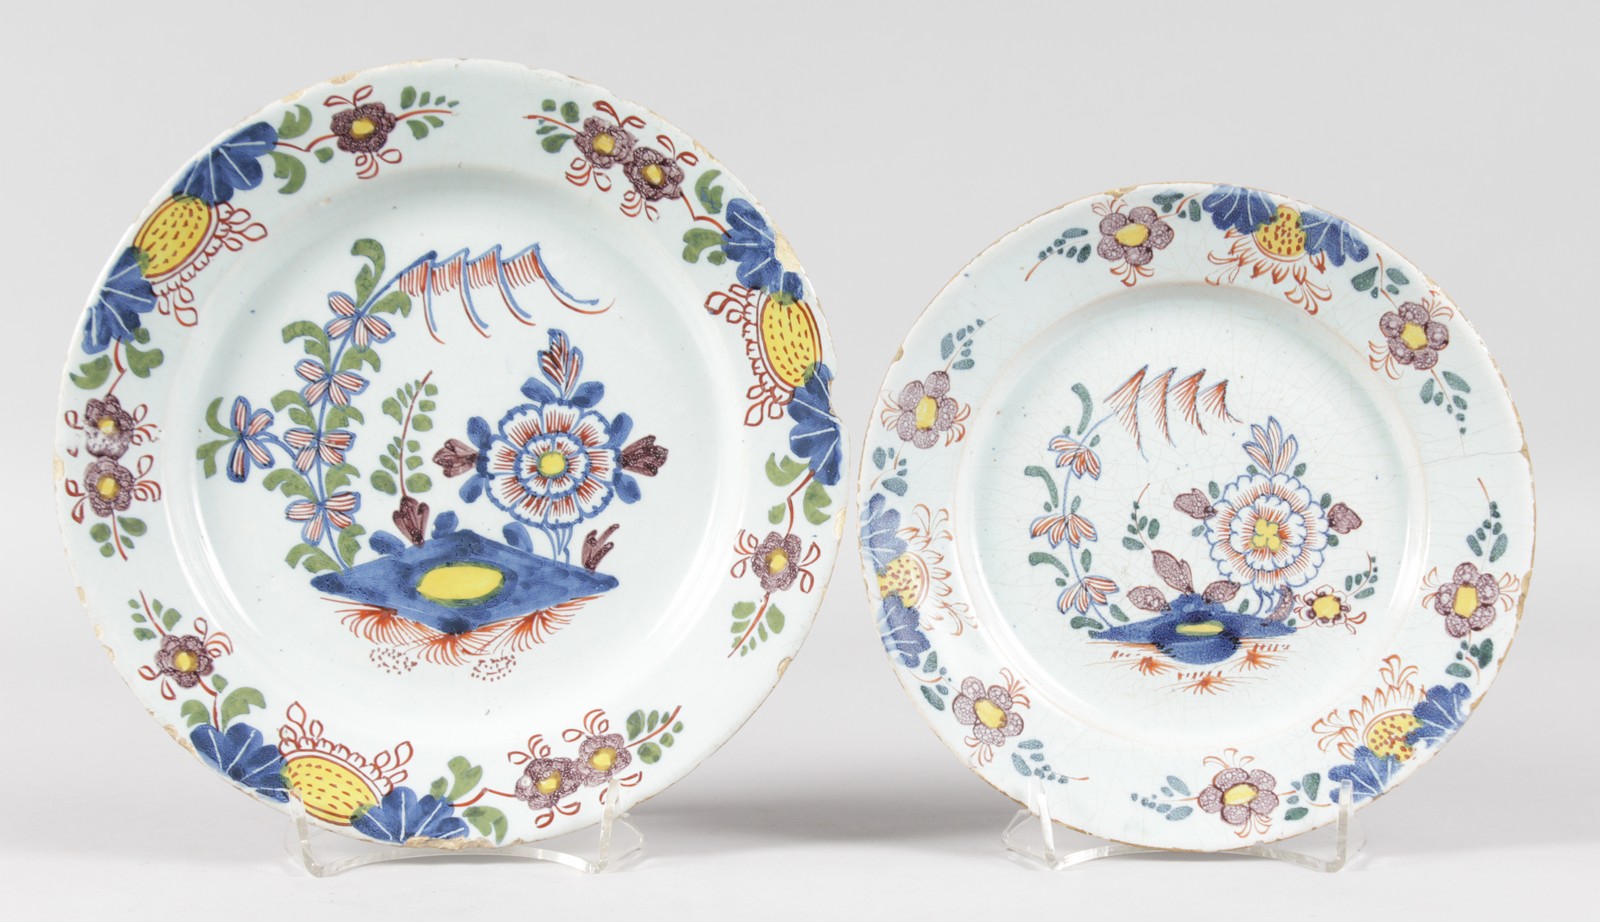 TWO ALMOST IDENTICAL 18TH CENTURY DELFT PLATES. 9ins and 7.5ins diameter.